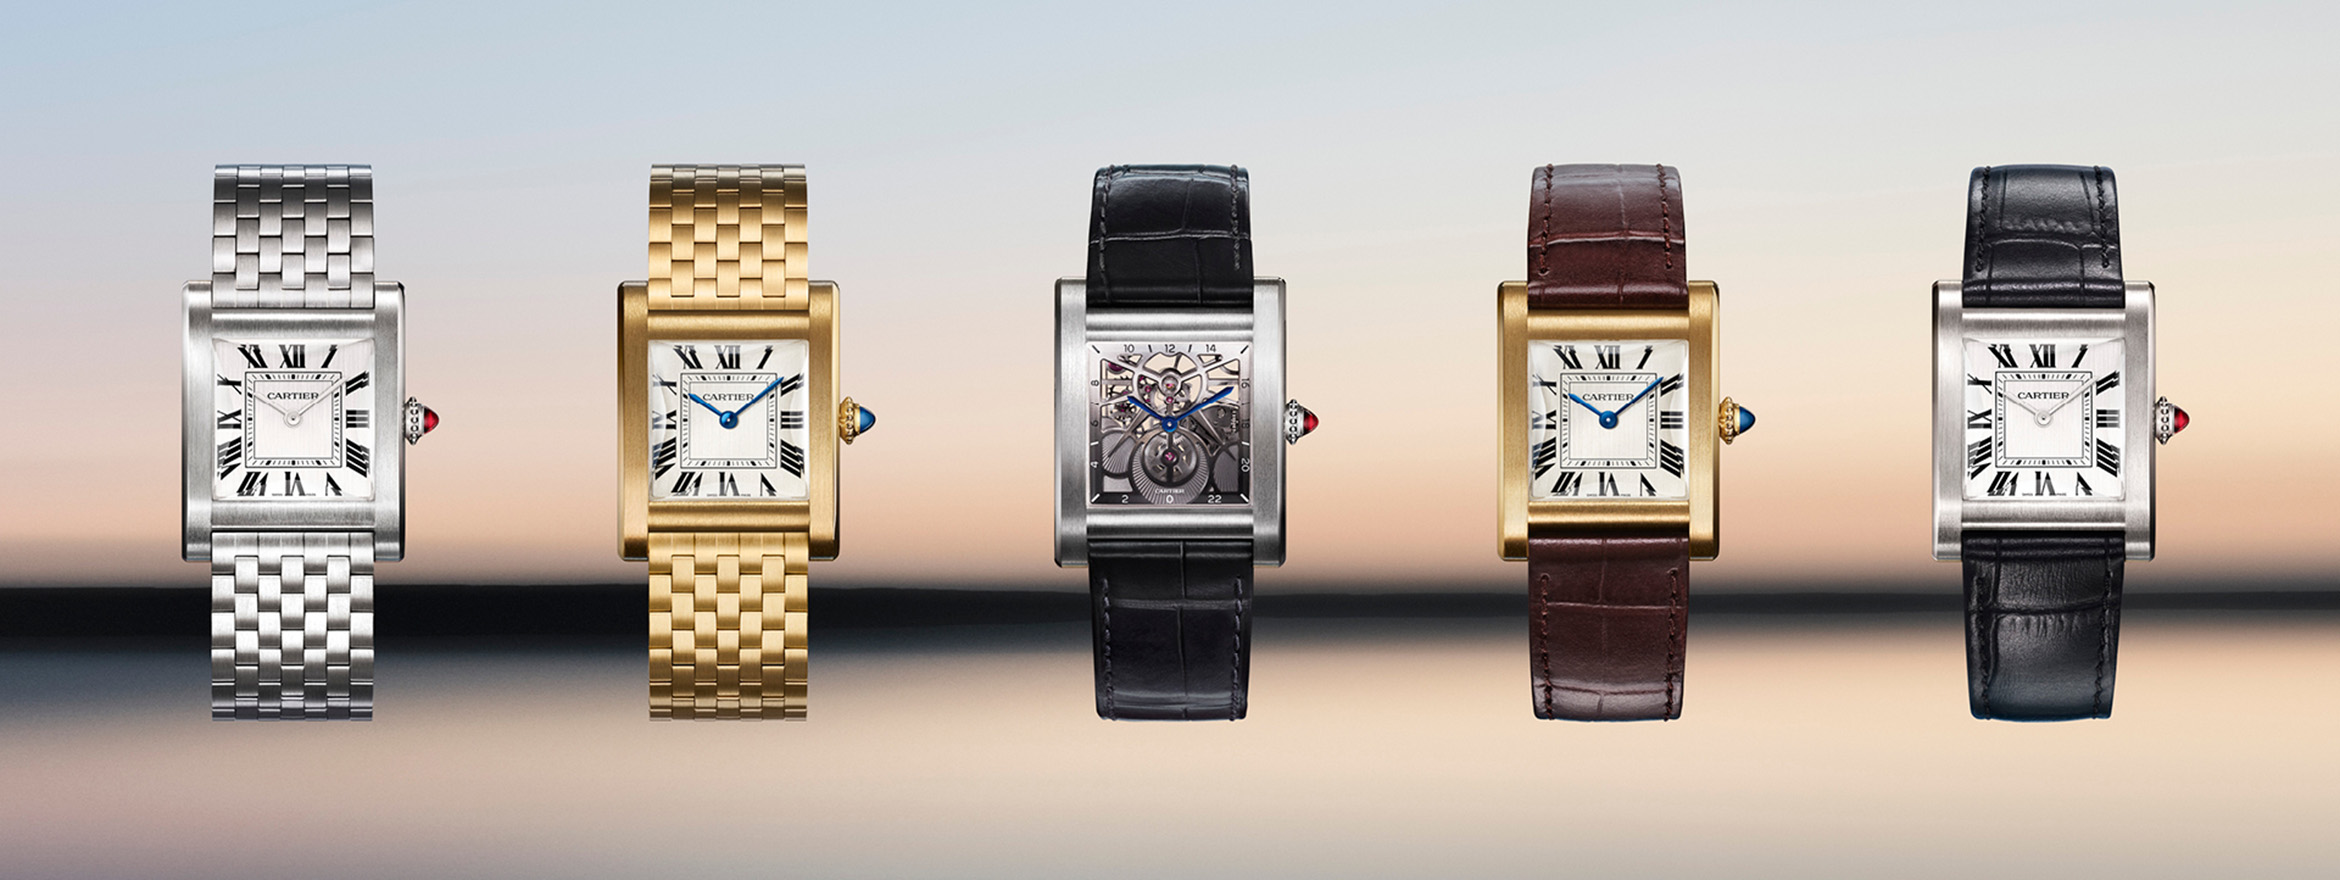 Cartier’s Latest Creations Reimagine its Icons